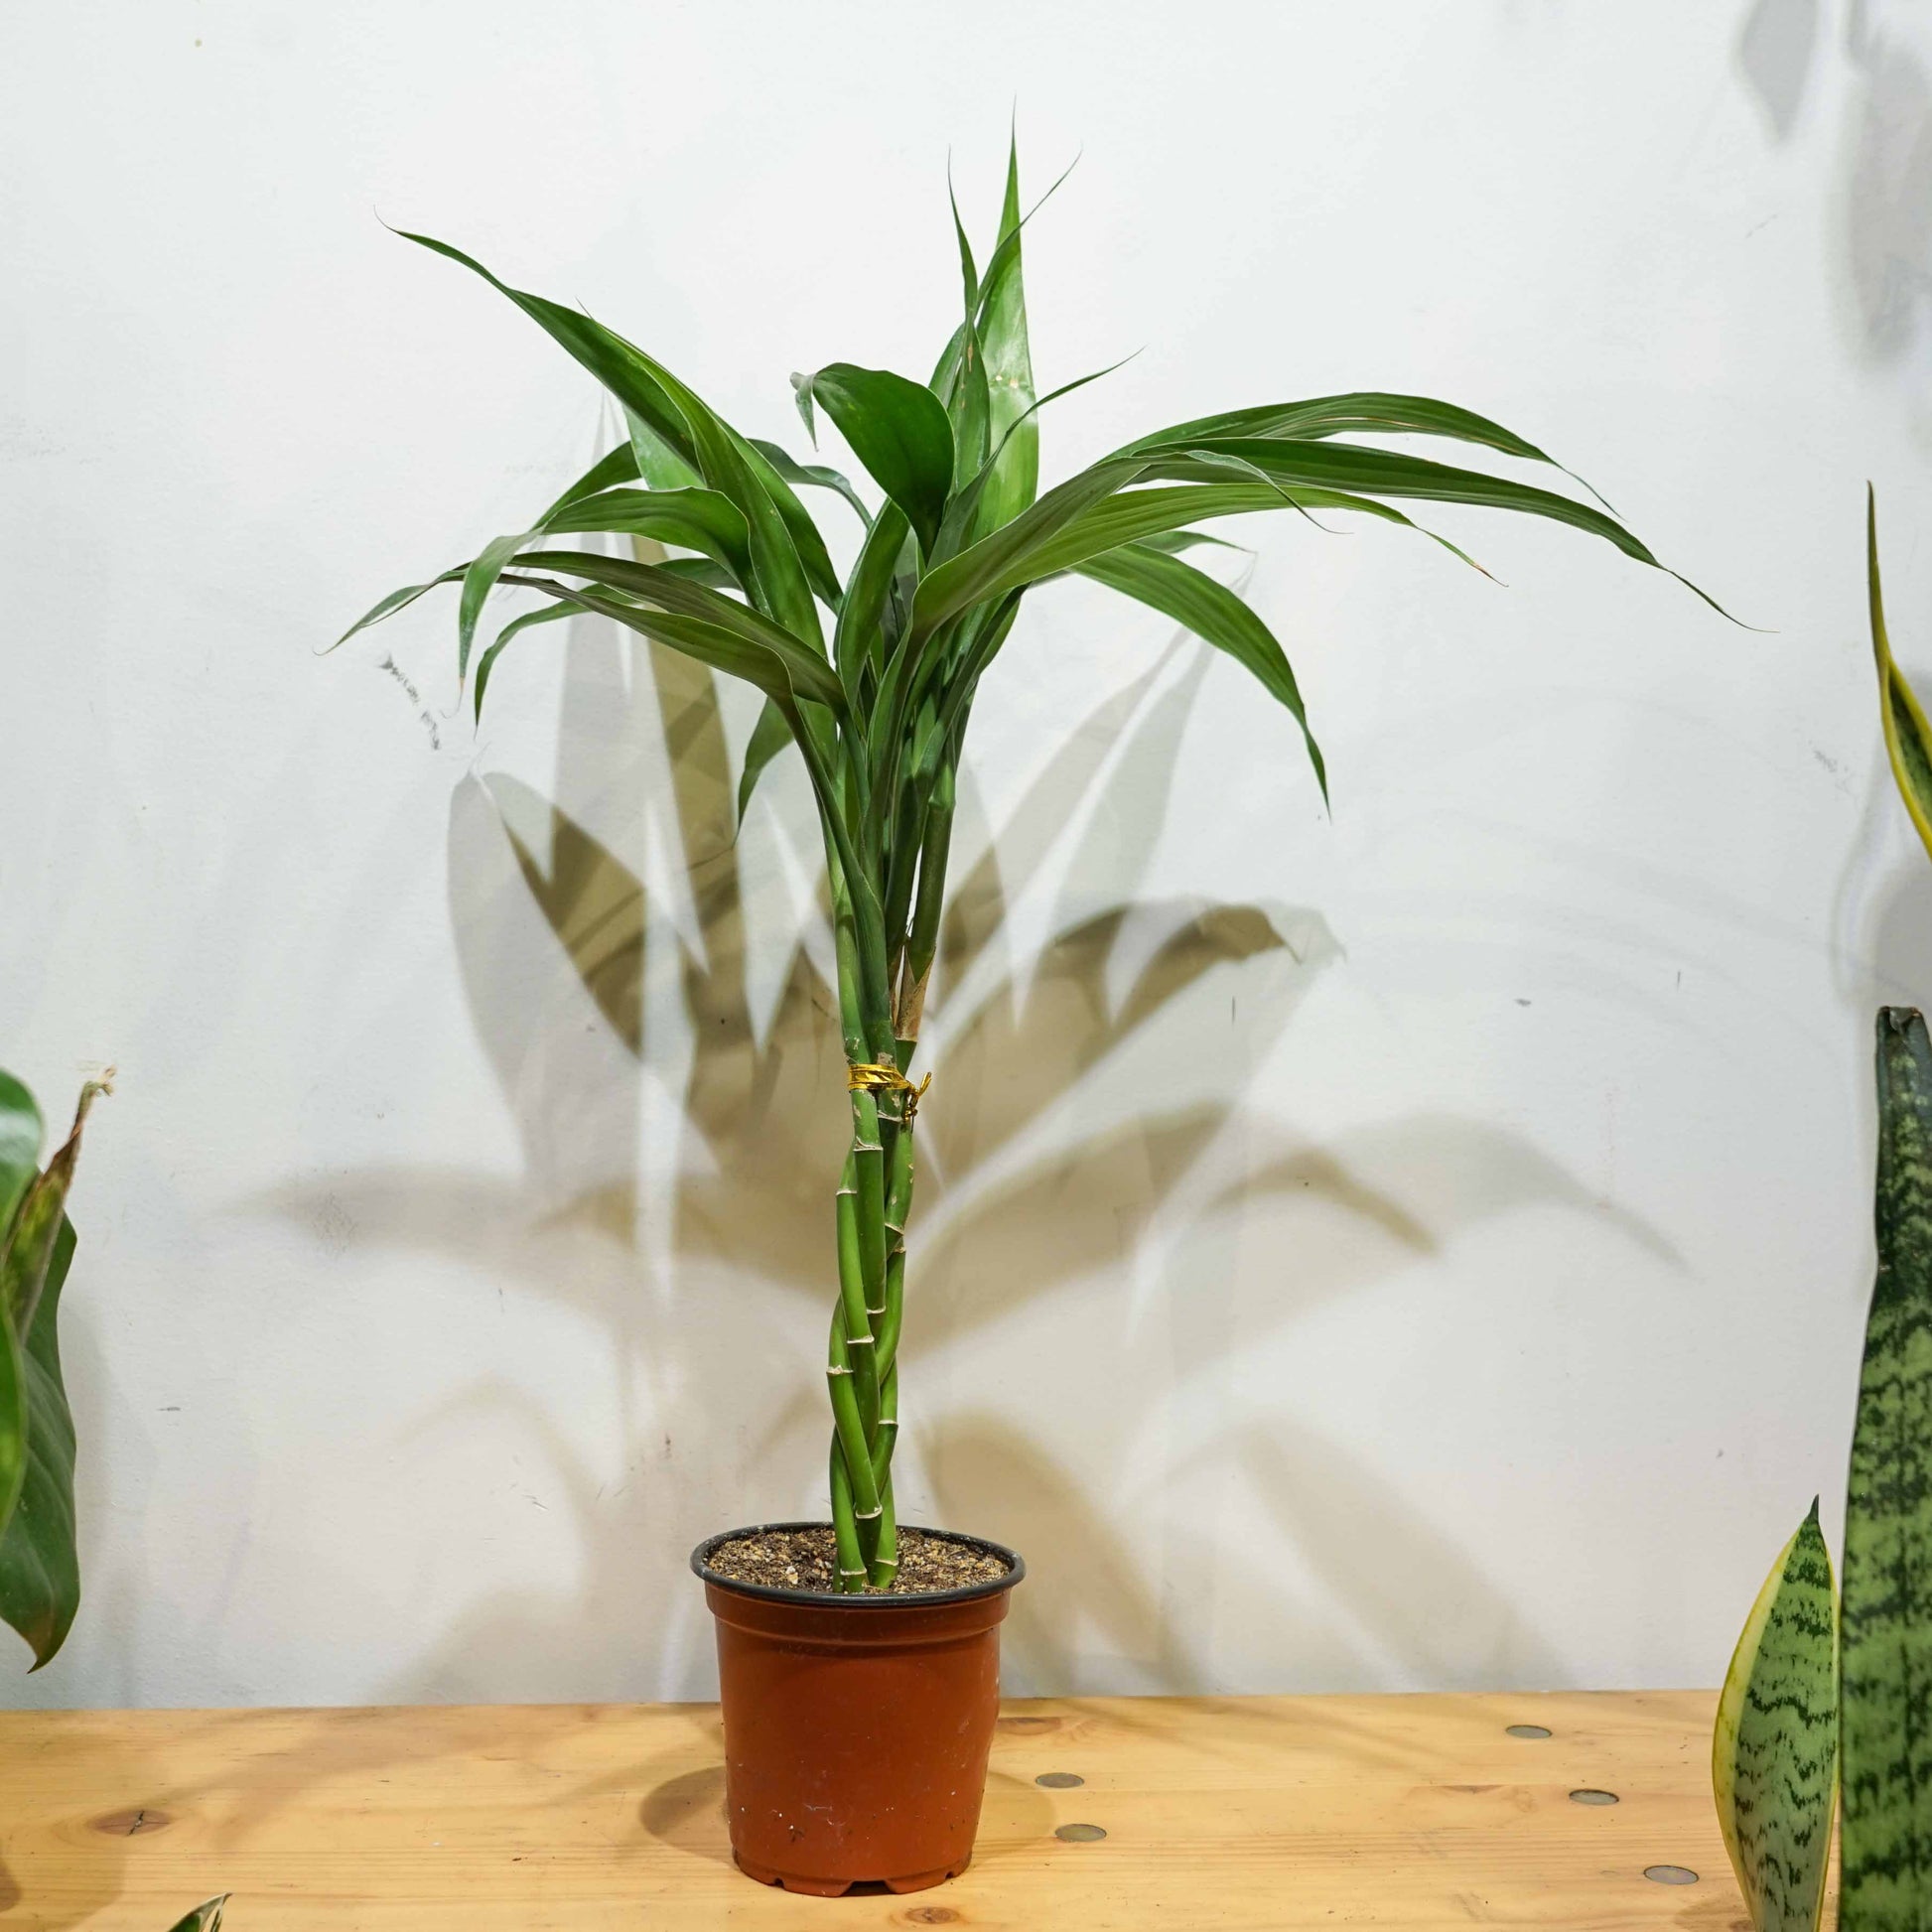 Aboera, Dracaena (Dracaena braunii) in a 5 inch pot. Indoor plant for sale by Promise Supply for delivery and pickup in Toronto